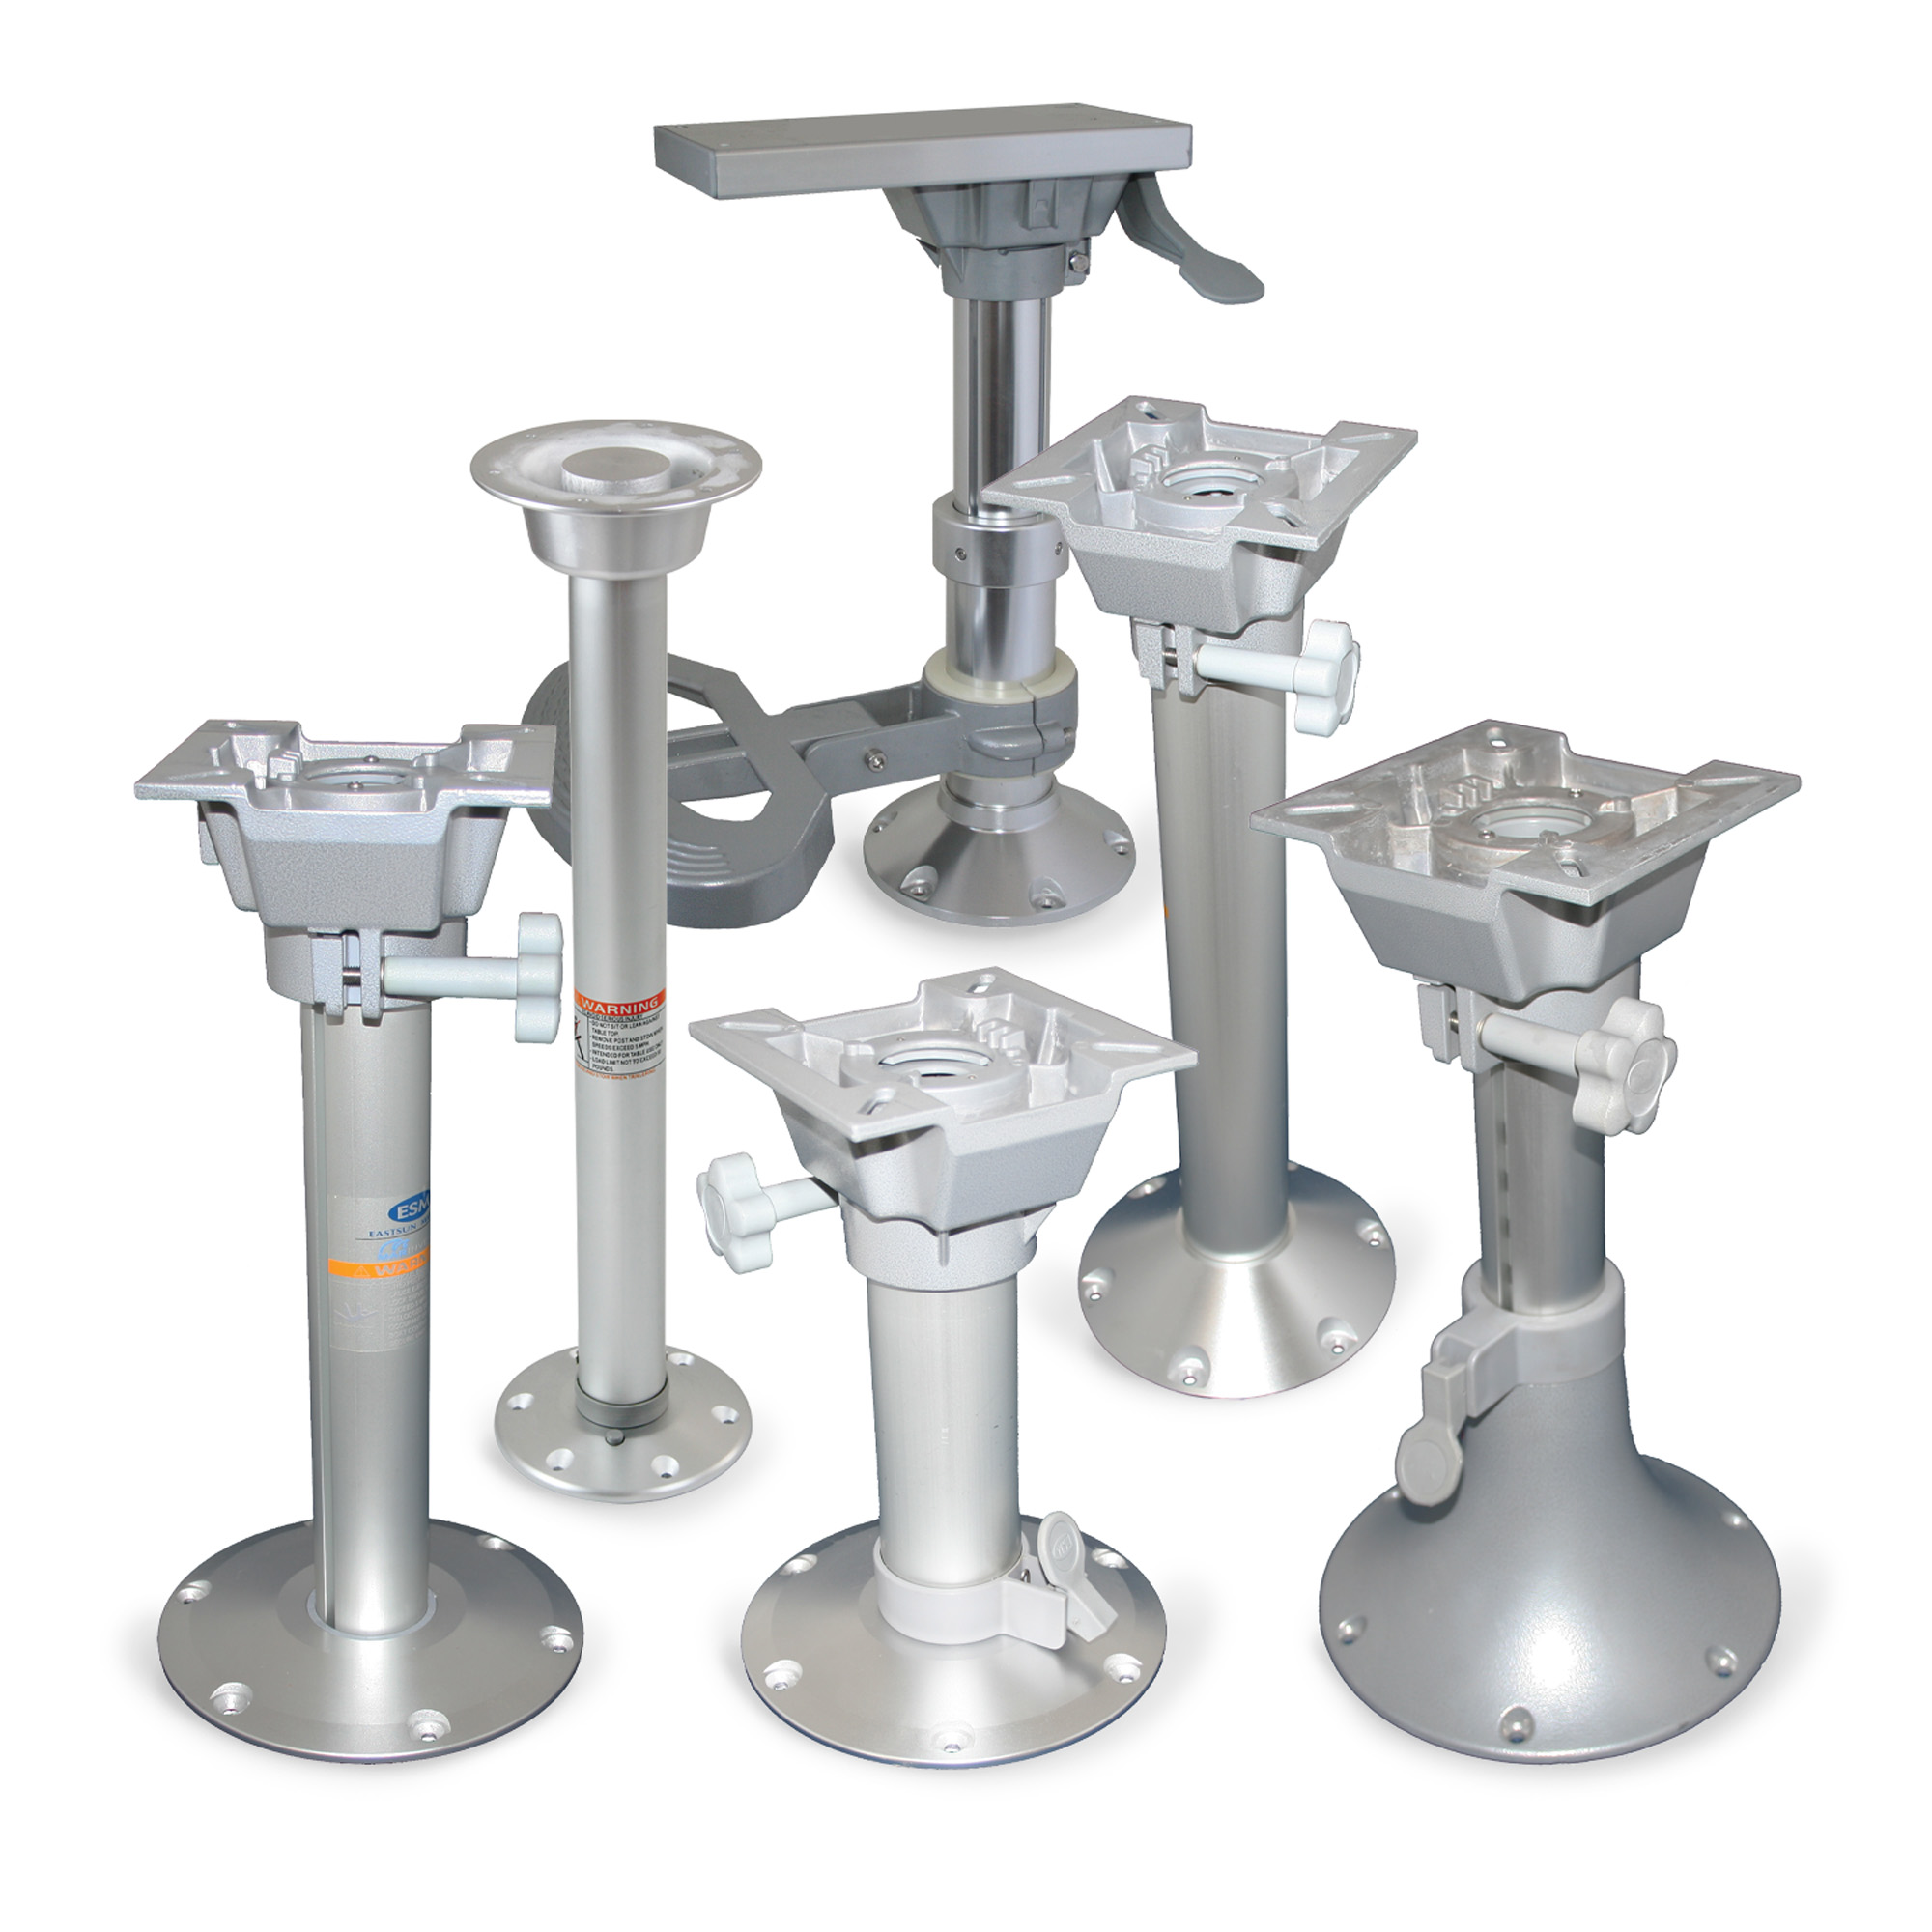 Product category - Pedestal Tables - Seat Pedestals / Swivels